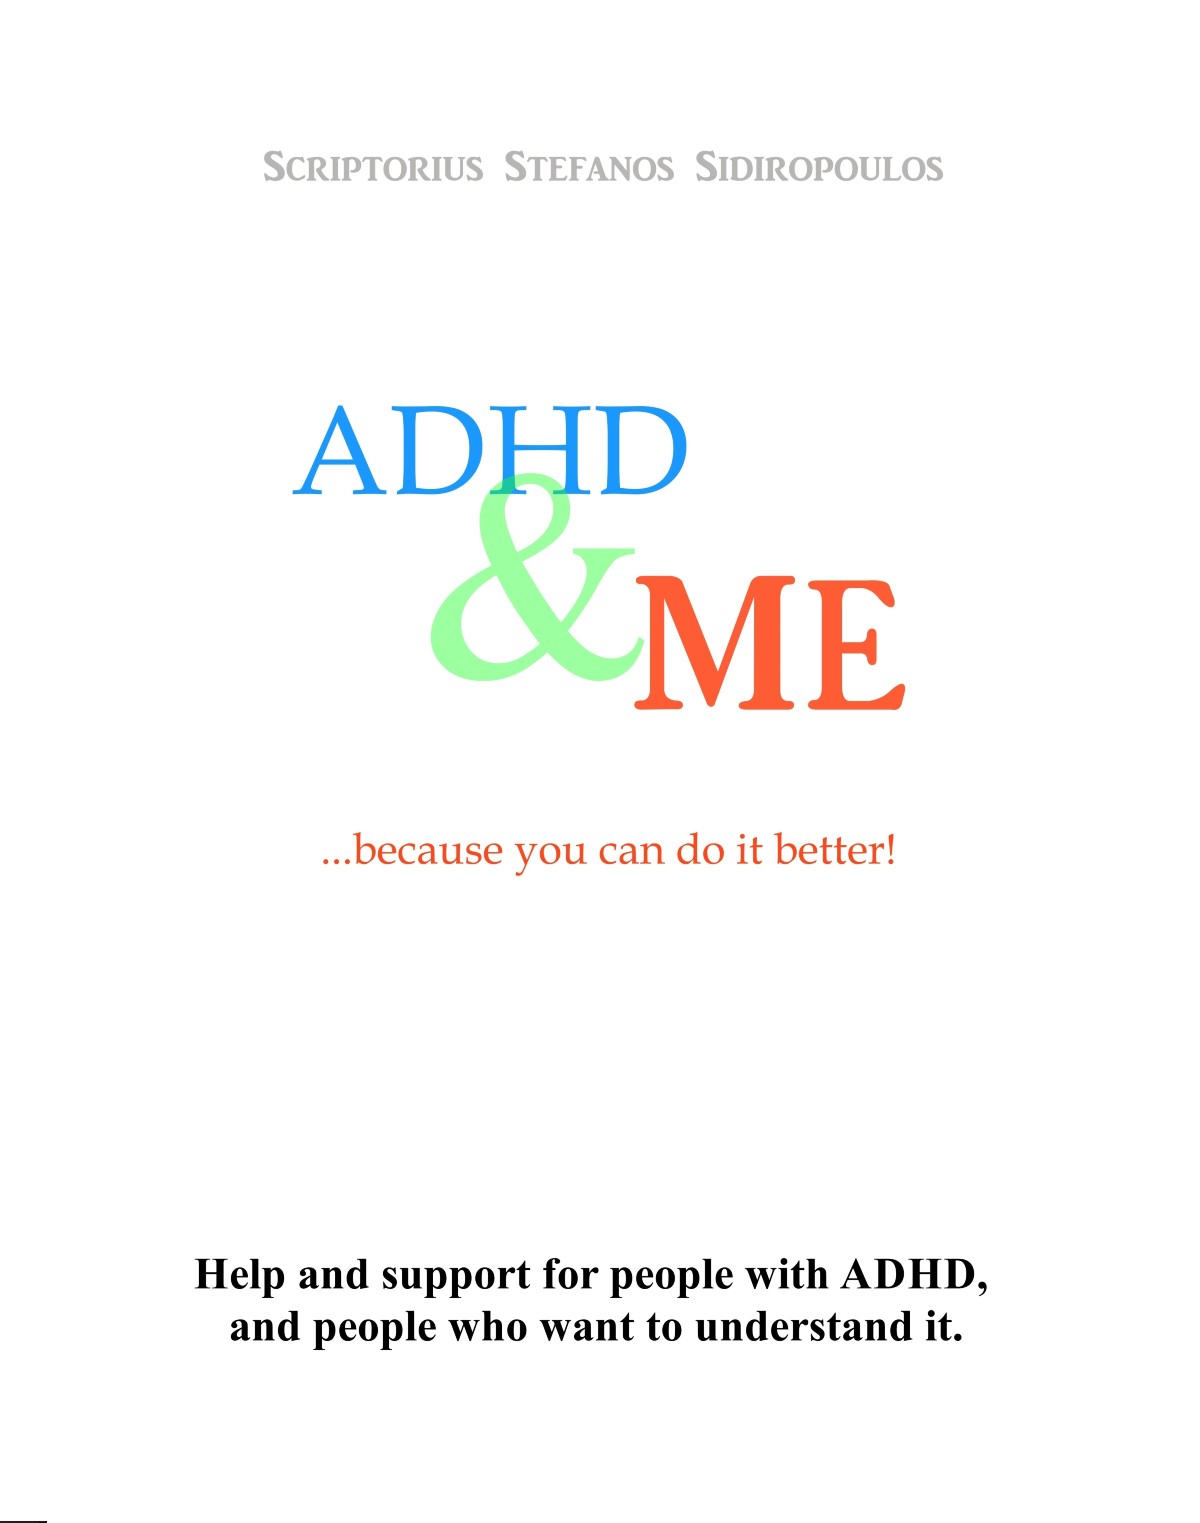 ADHD and Me, a Support for people with ADHD